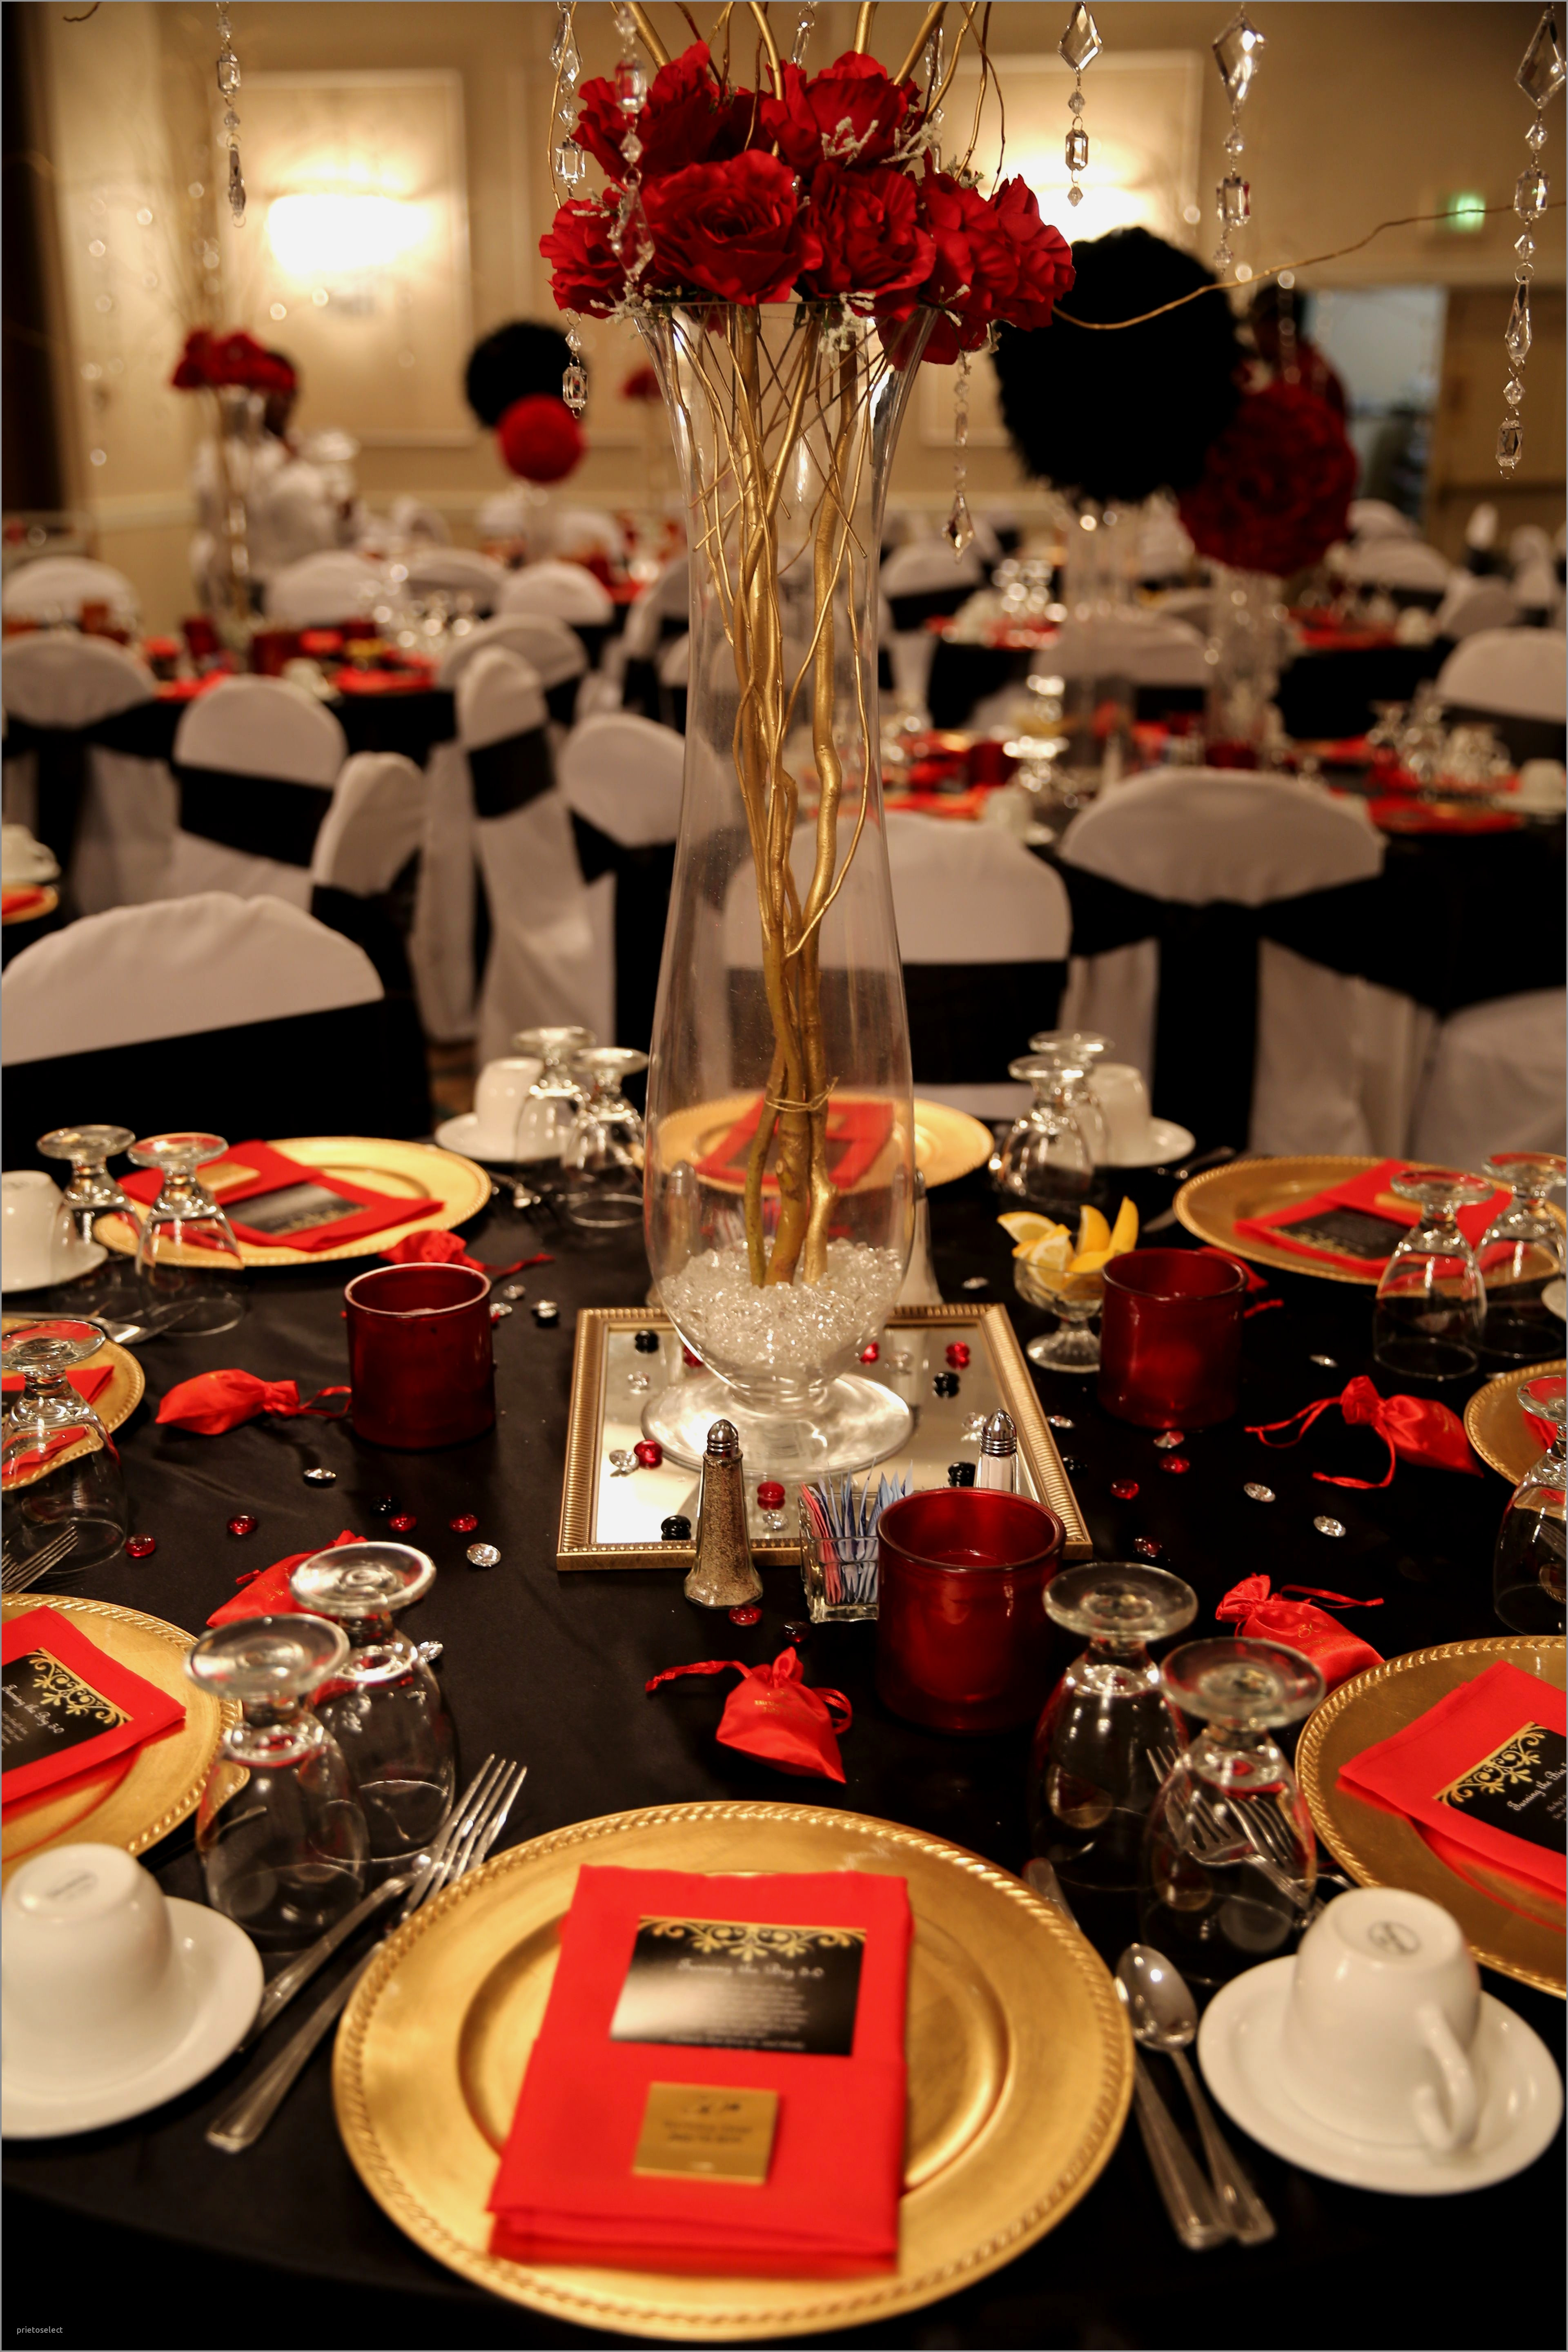 23 Awesome Black Vase Centerpieces 2024 free download black vase centerpieces of 75th birthday table decorations awesome ac2a2ec286a 15 cheap and easy diy in 75th birthday table decorations best of red black and gold table decorations for 50th 